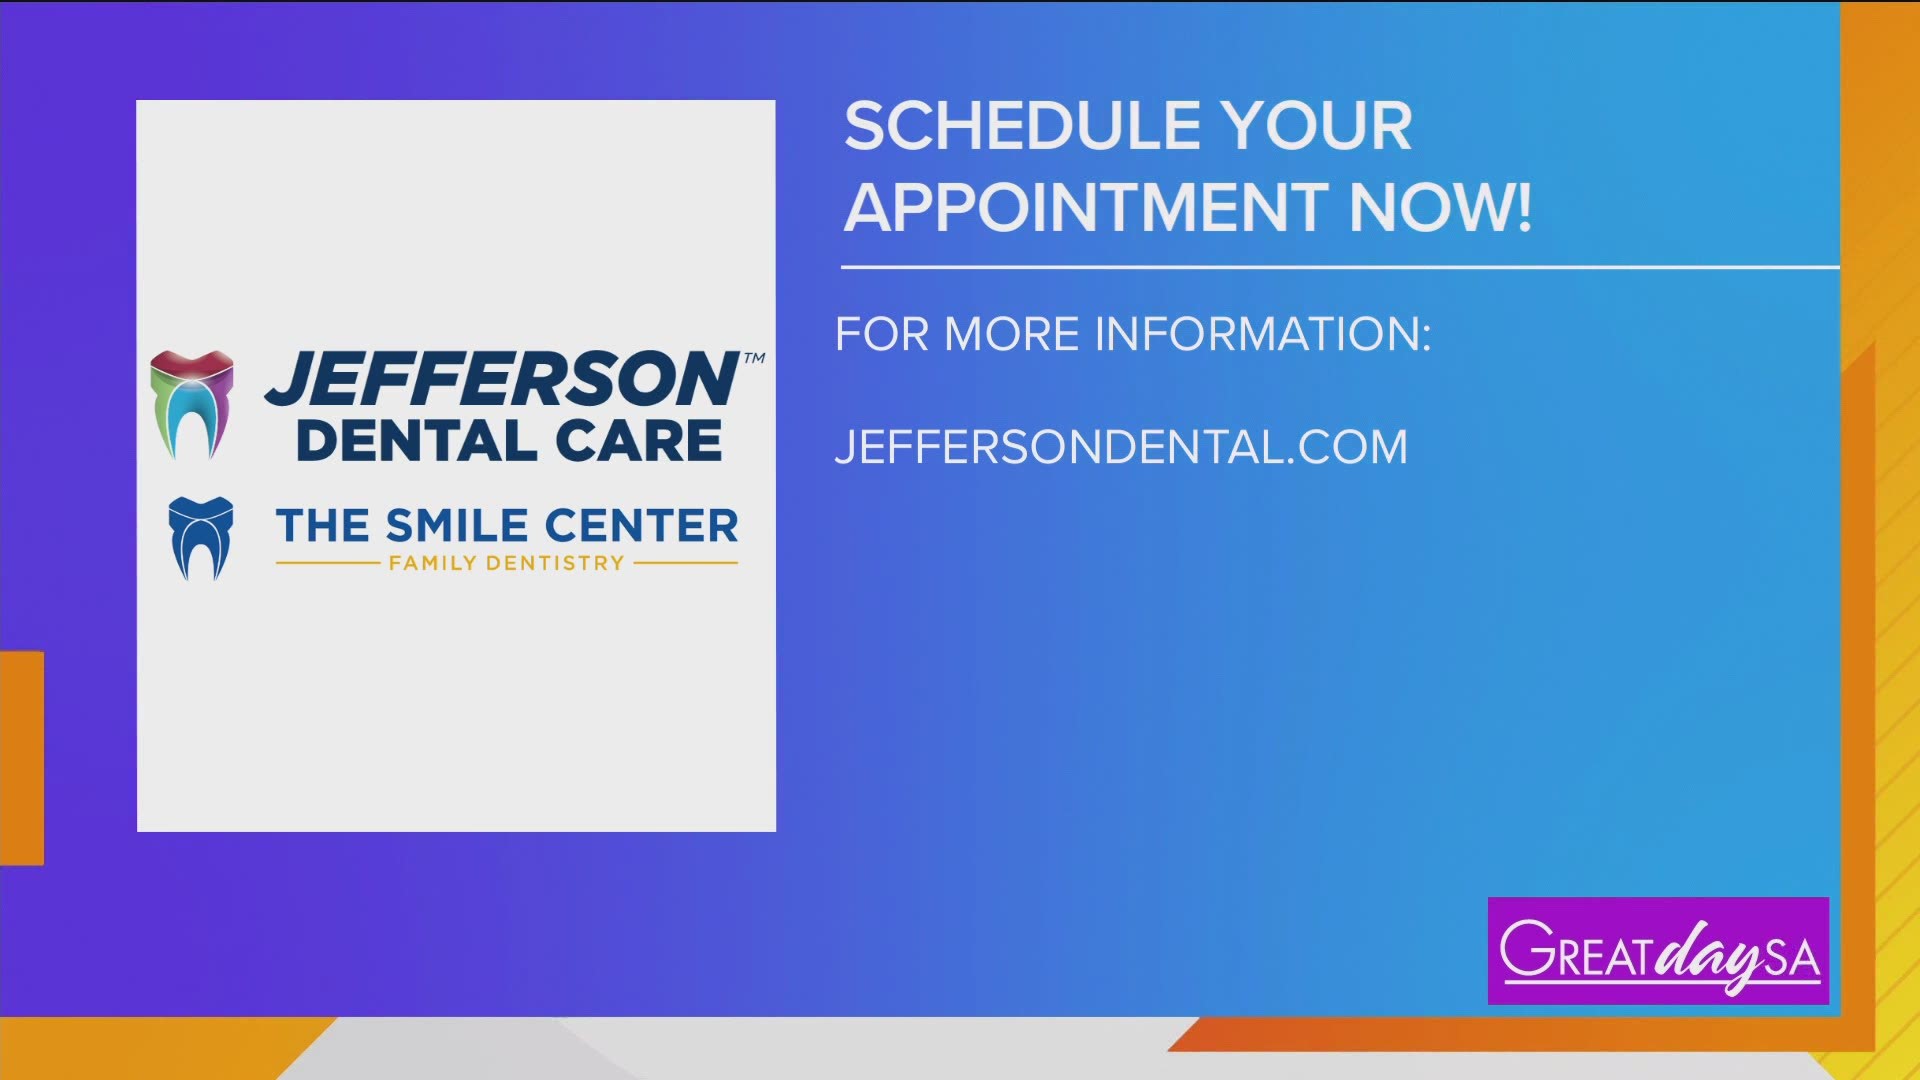 Jefferson Dental is reminding people to use their health benefits before the end of the year.